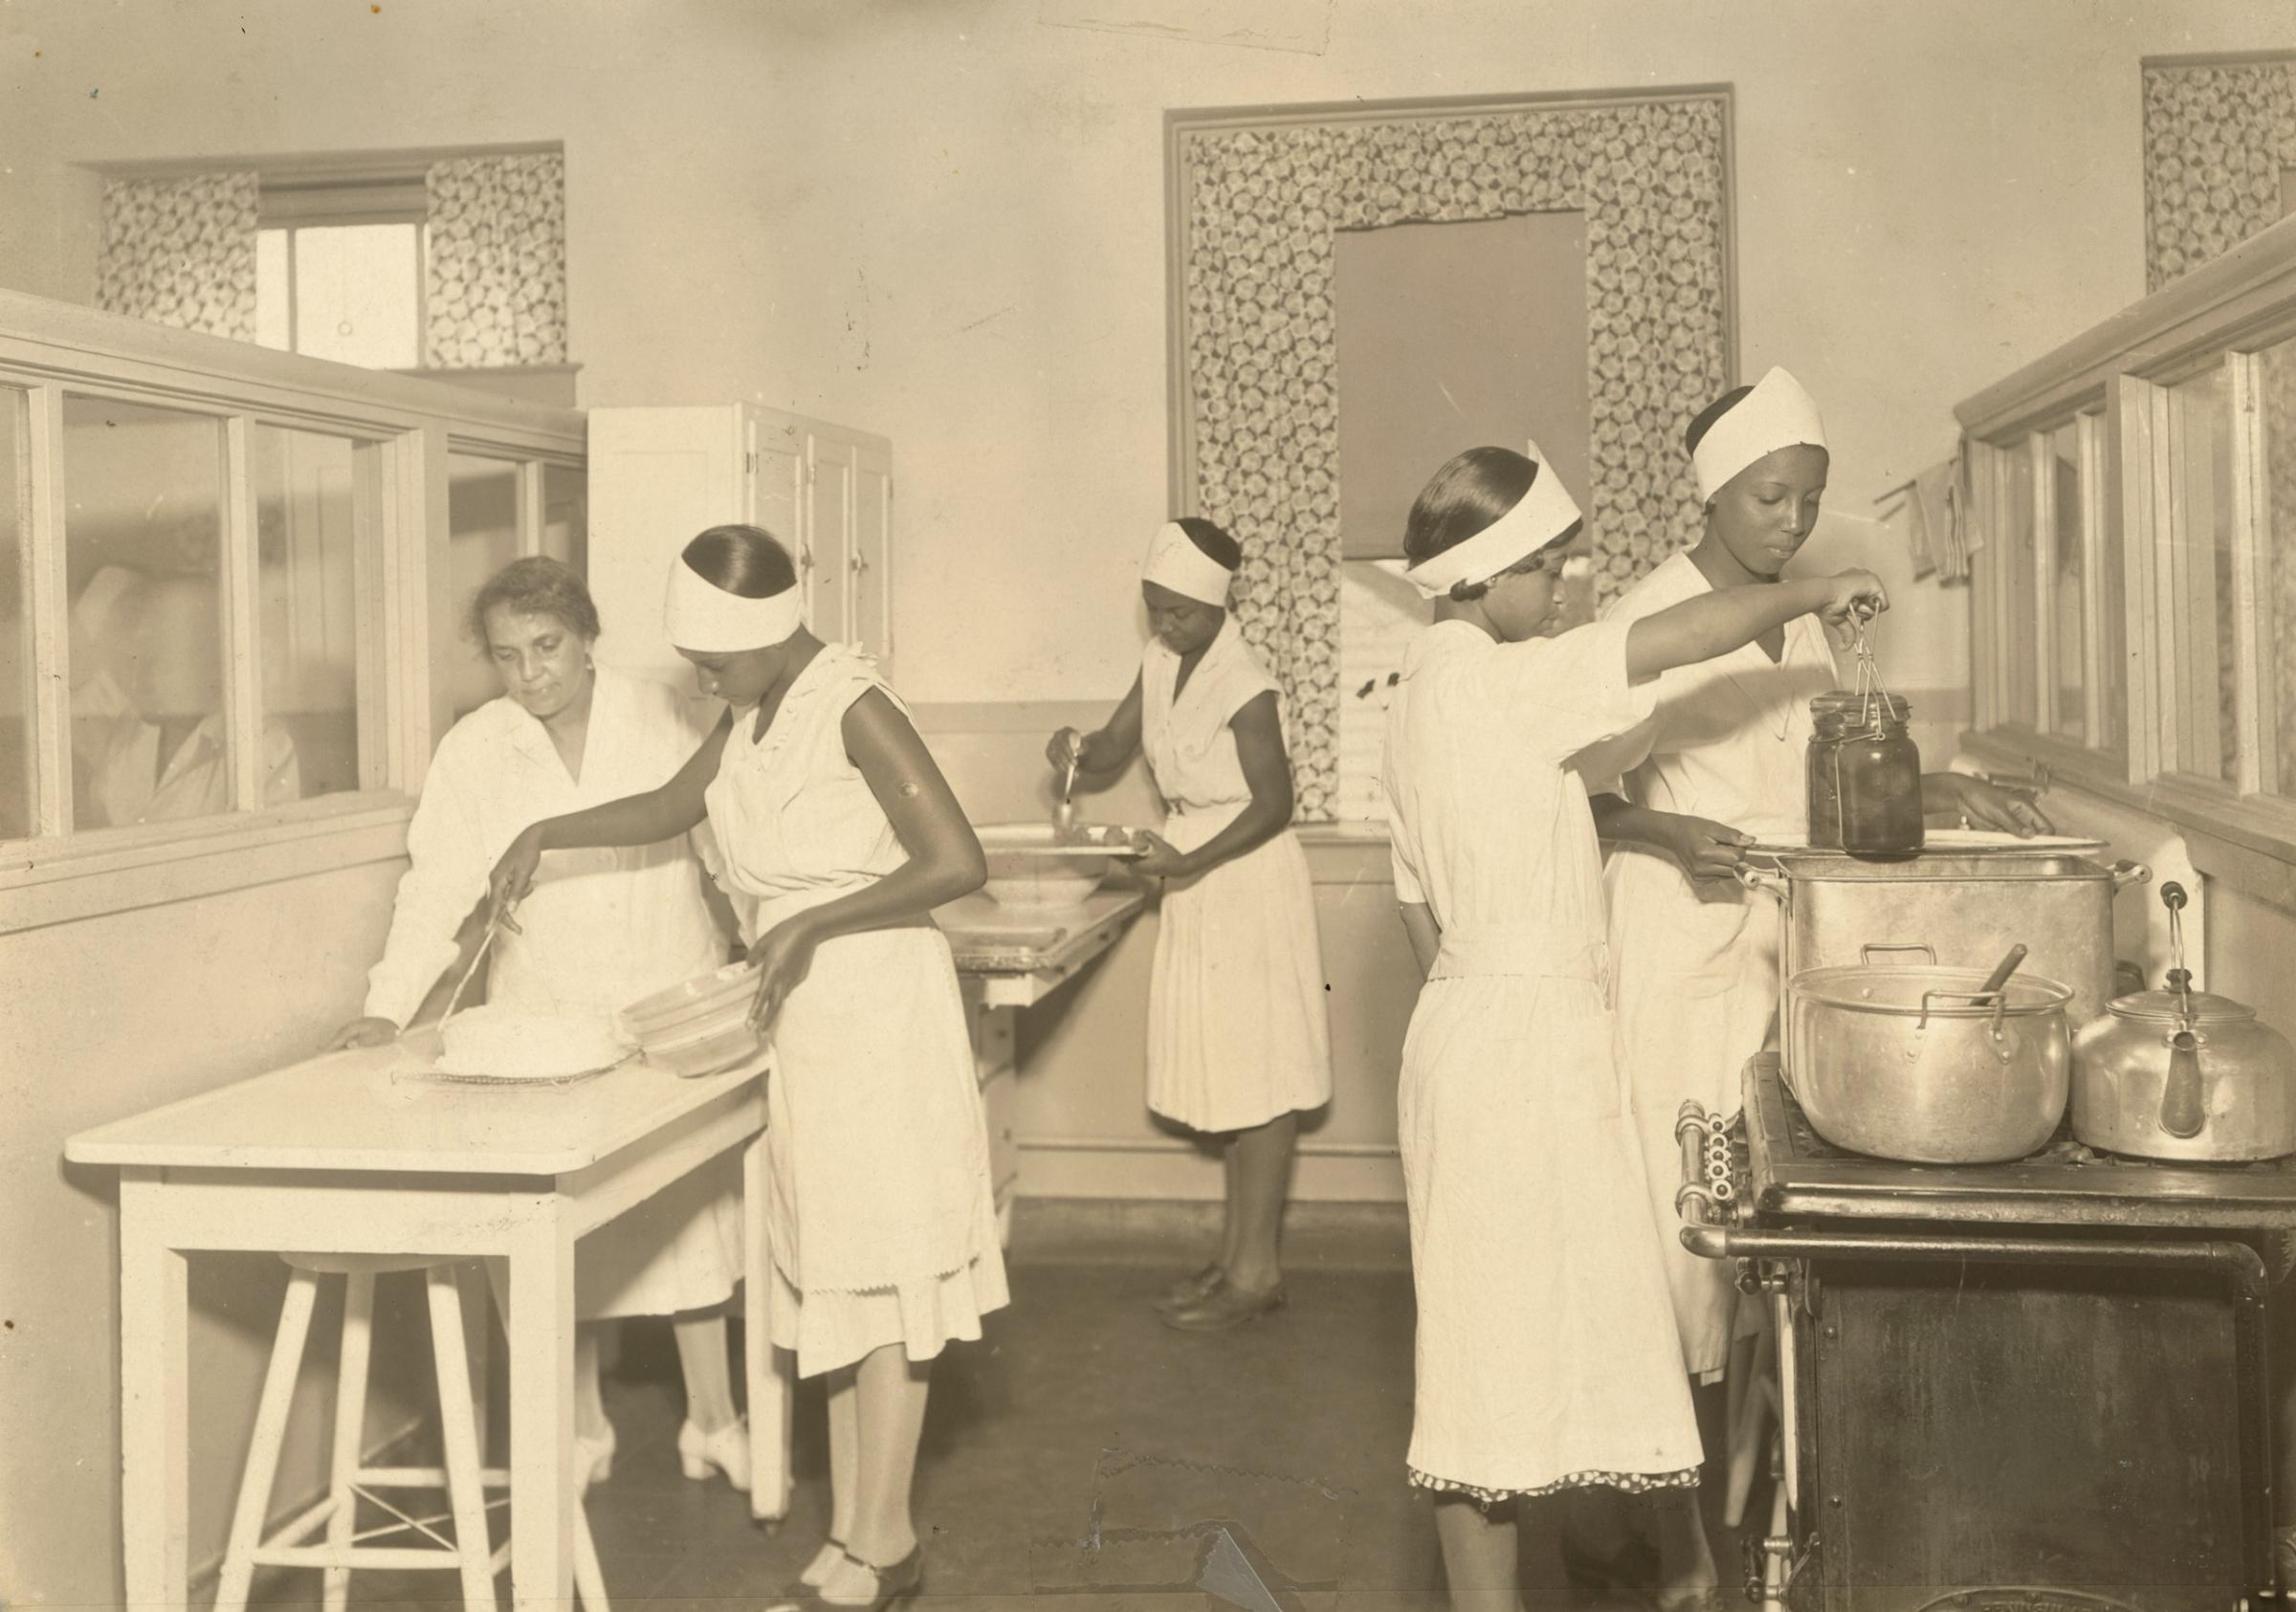 Four women working in a kitchen at the Manual Training and Industrial School for Colored Youth in Bordentown, NJ. A fifth, older woman oversees a younger as she ices a cake, 1935.